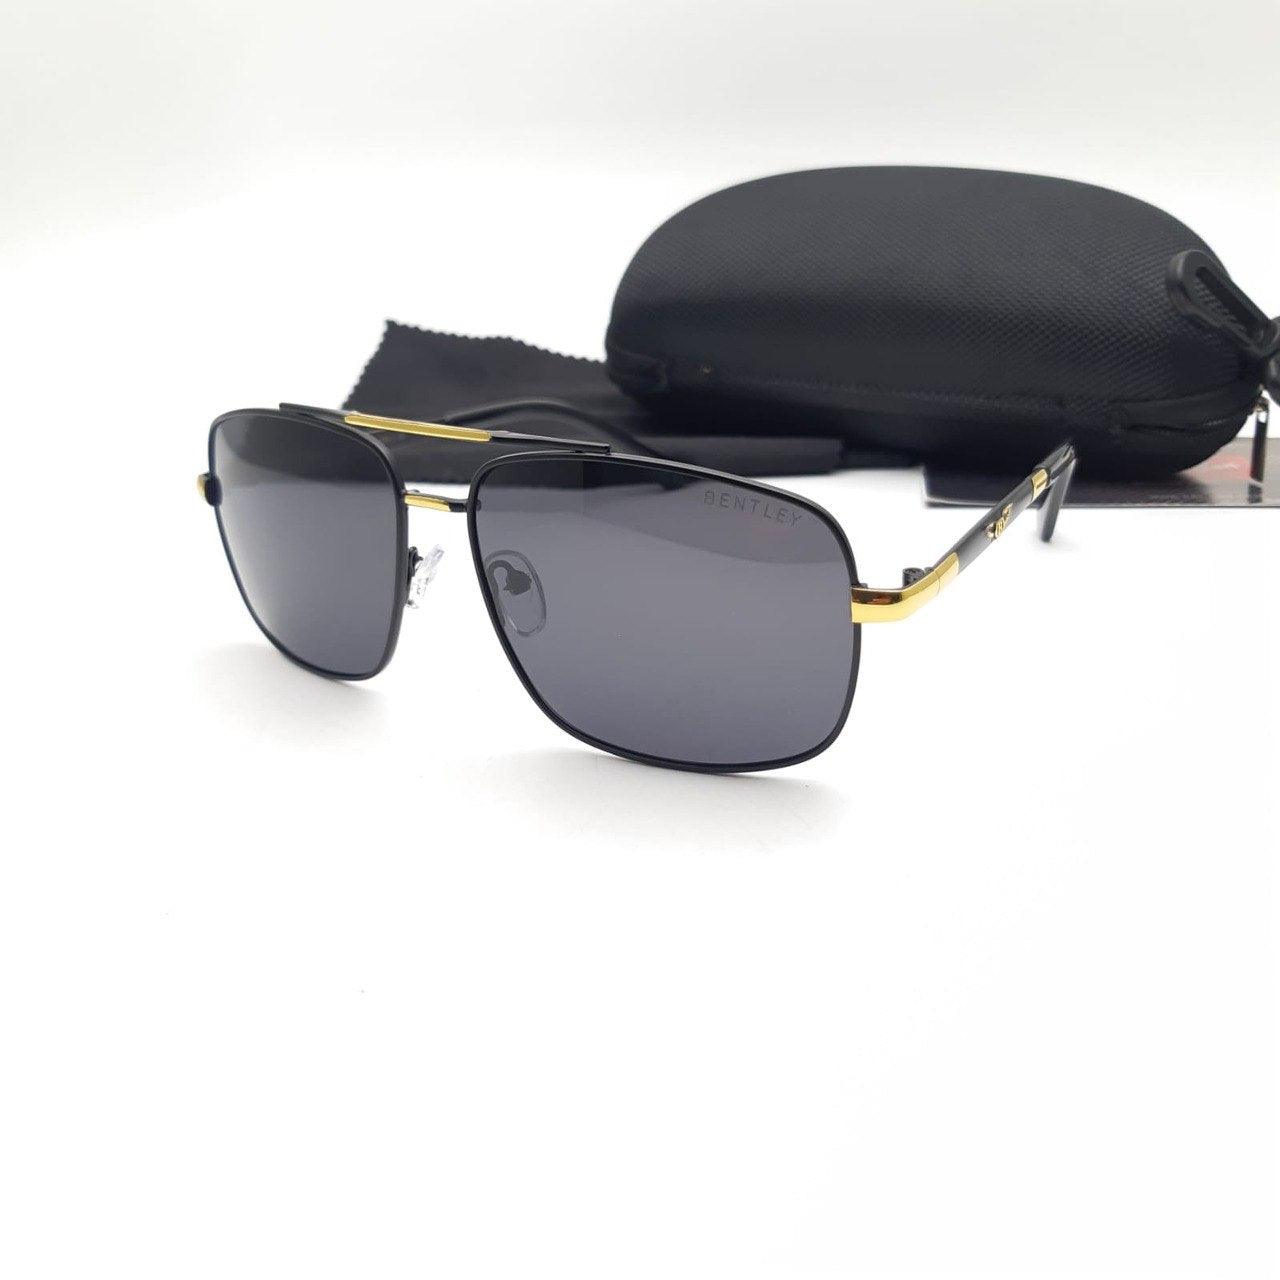 Bentley Spectacles - Customized Prescription Sunglasses and Spectacles